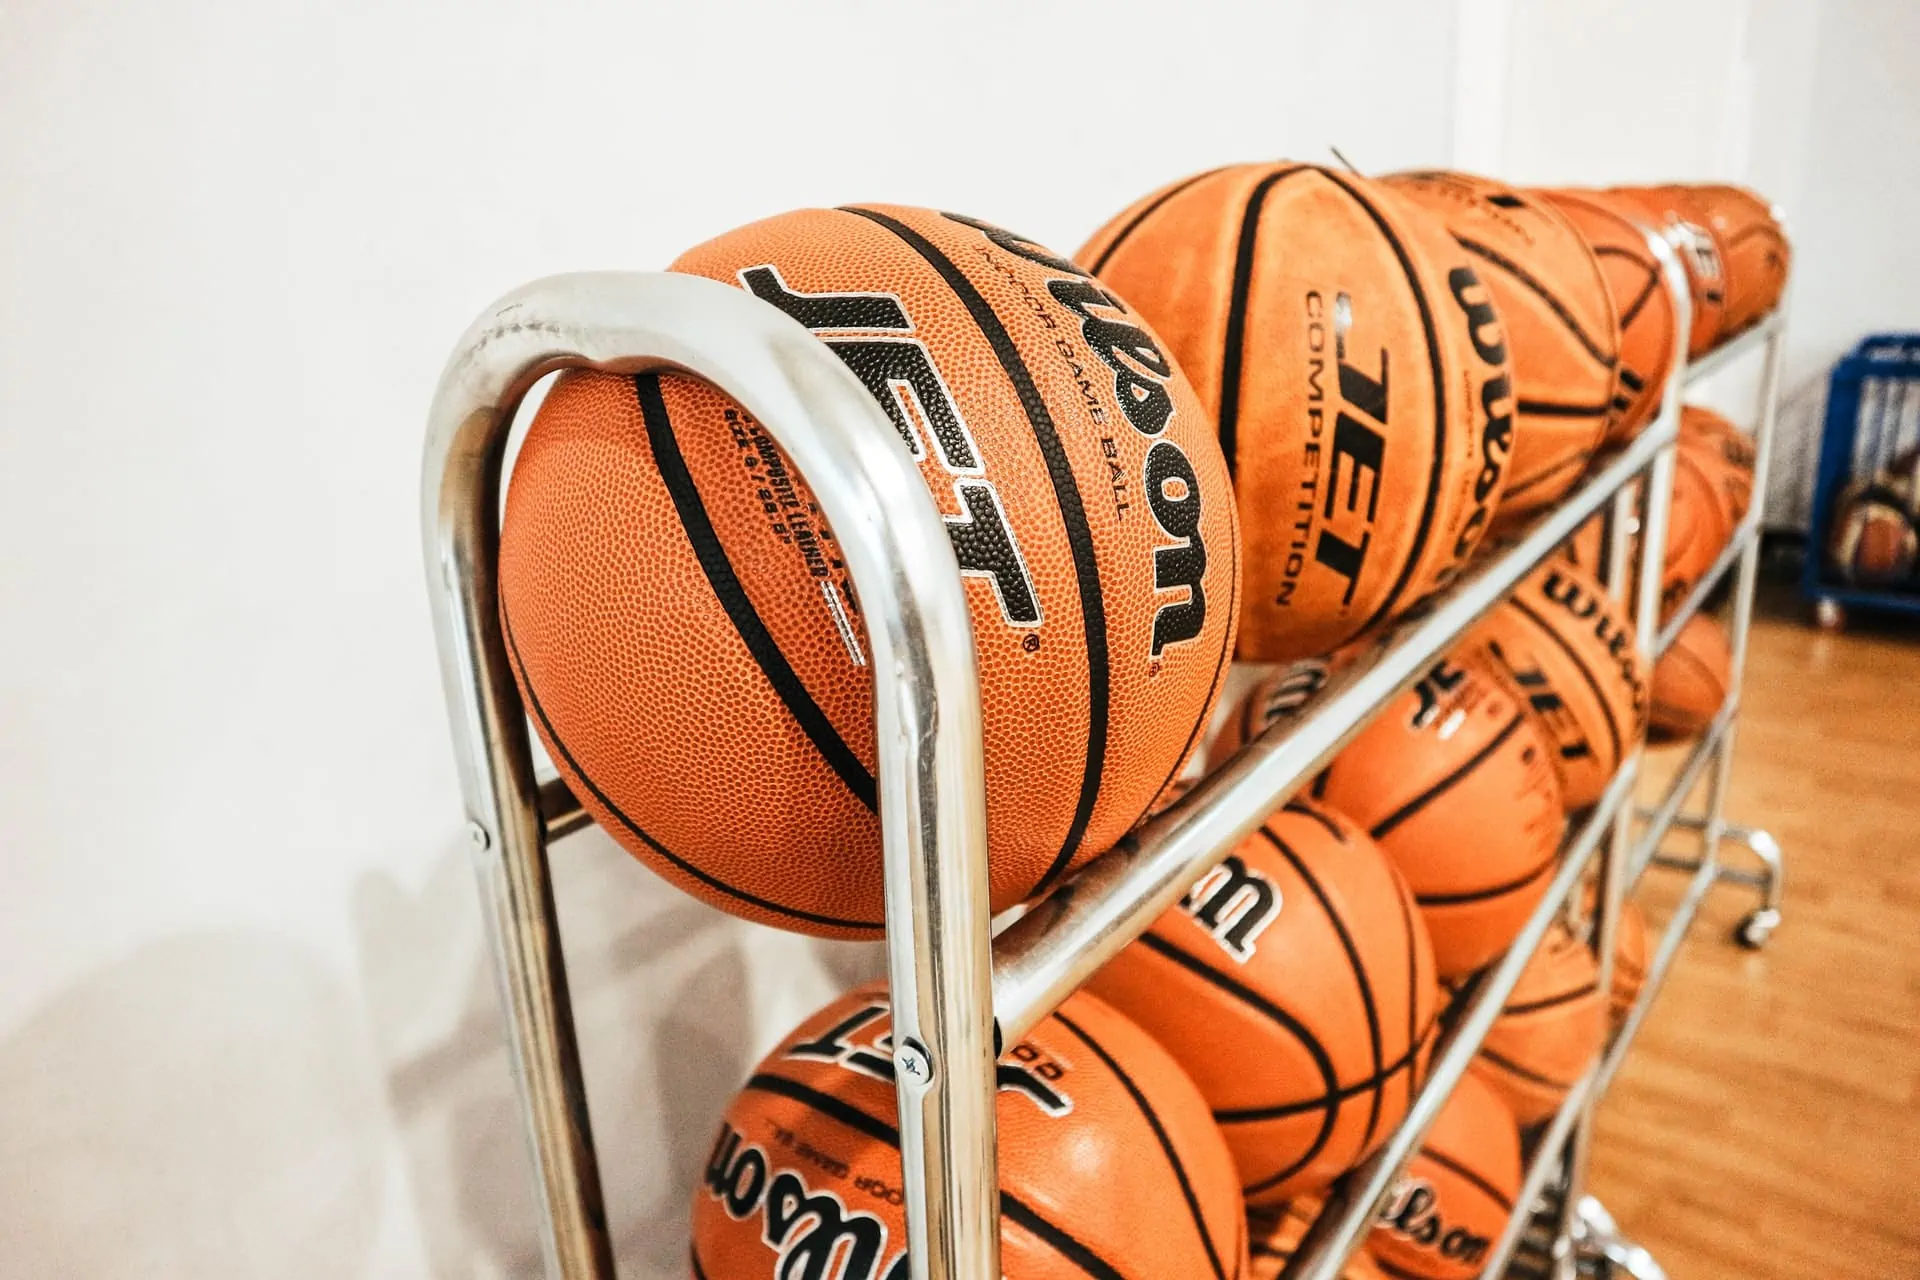 How Many Basketballs are Made Each Year